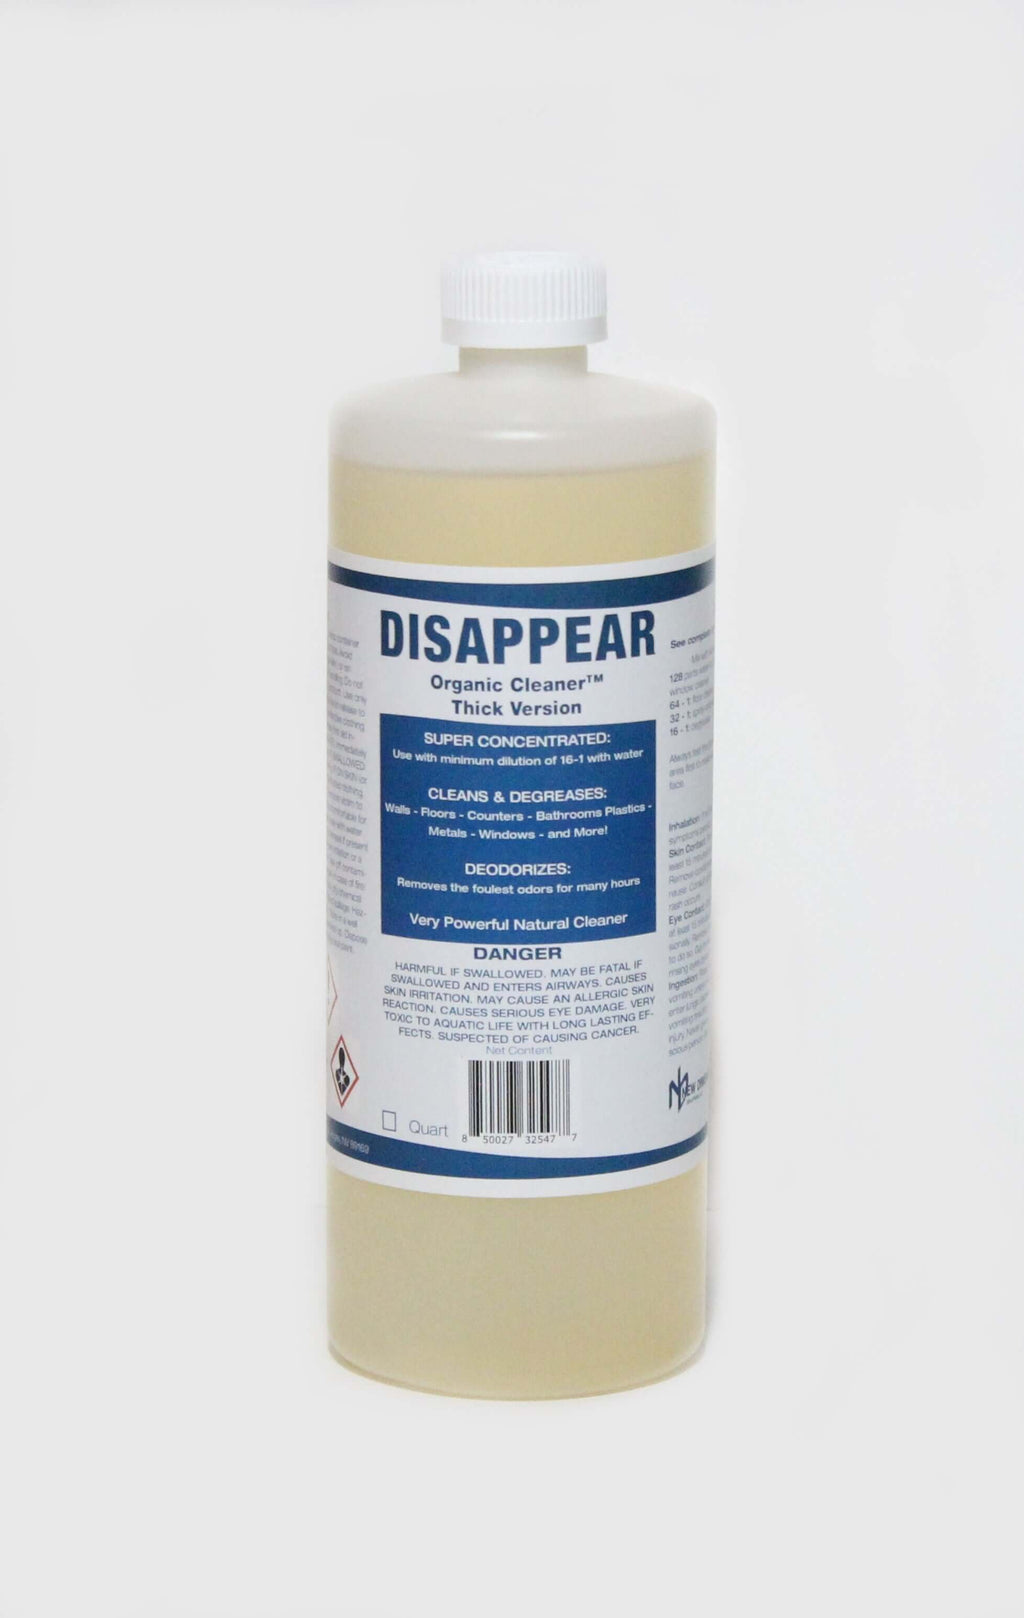 Disappear Organic Cleaner | NEW DIMENSIONS SOLUTIONS, LLC